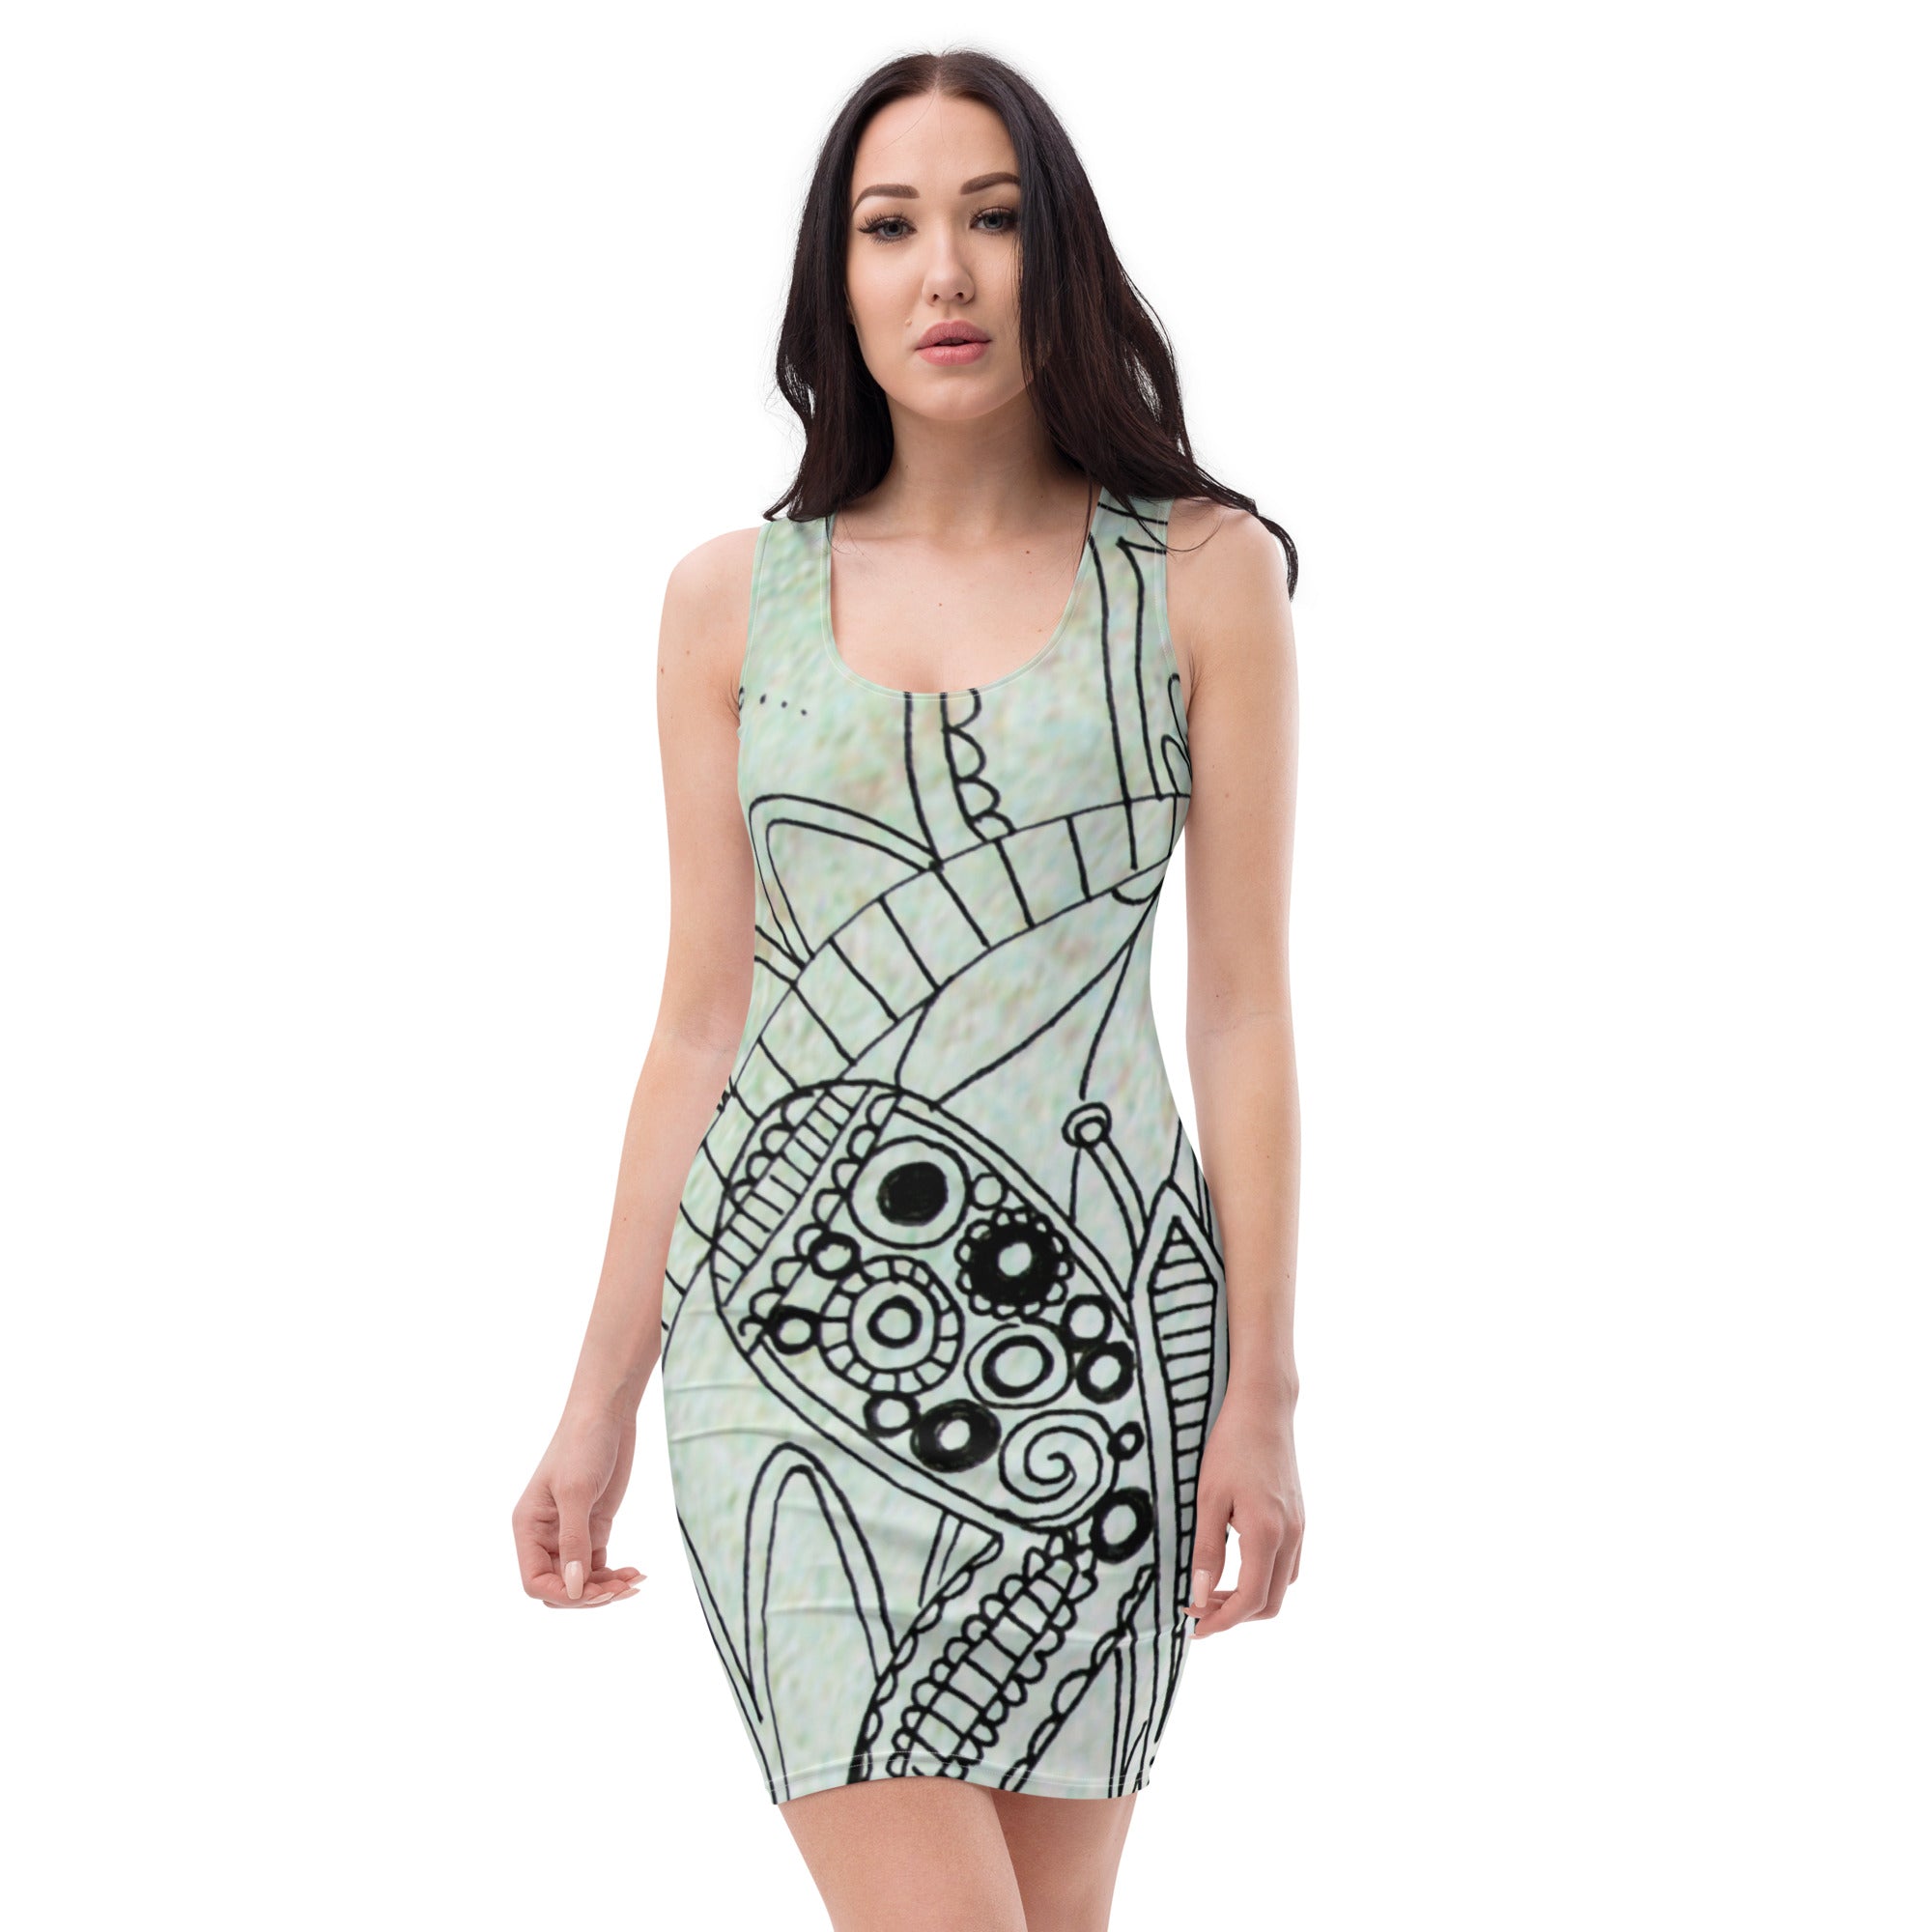 "Fluttering Elegance: Butterfly Print Comfort Fitted Dress", lioness-love